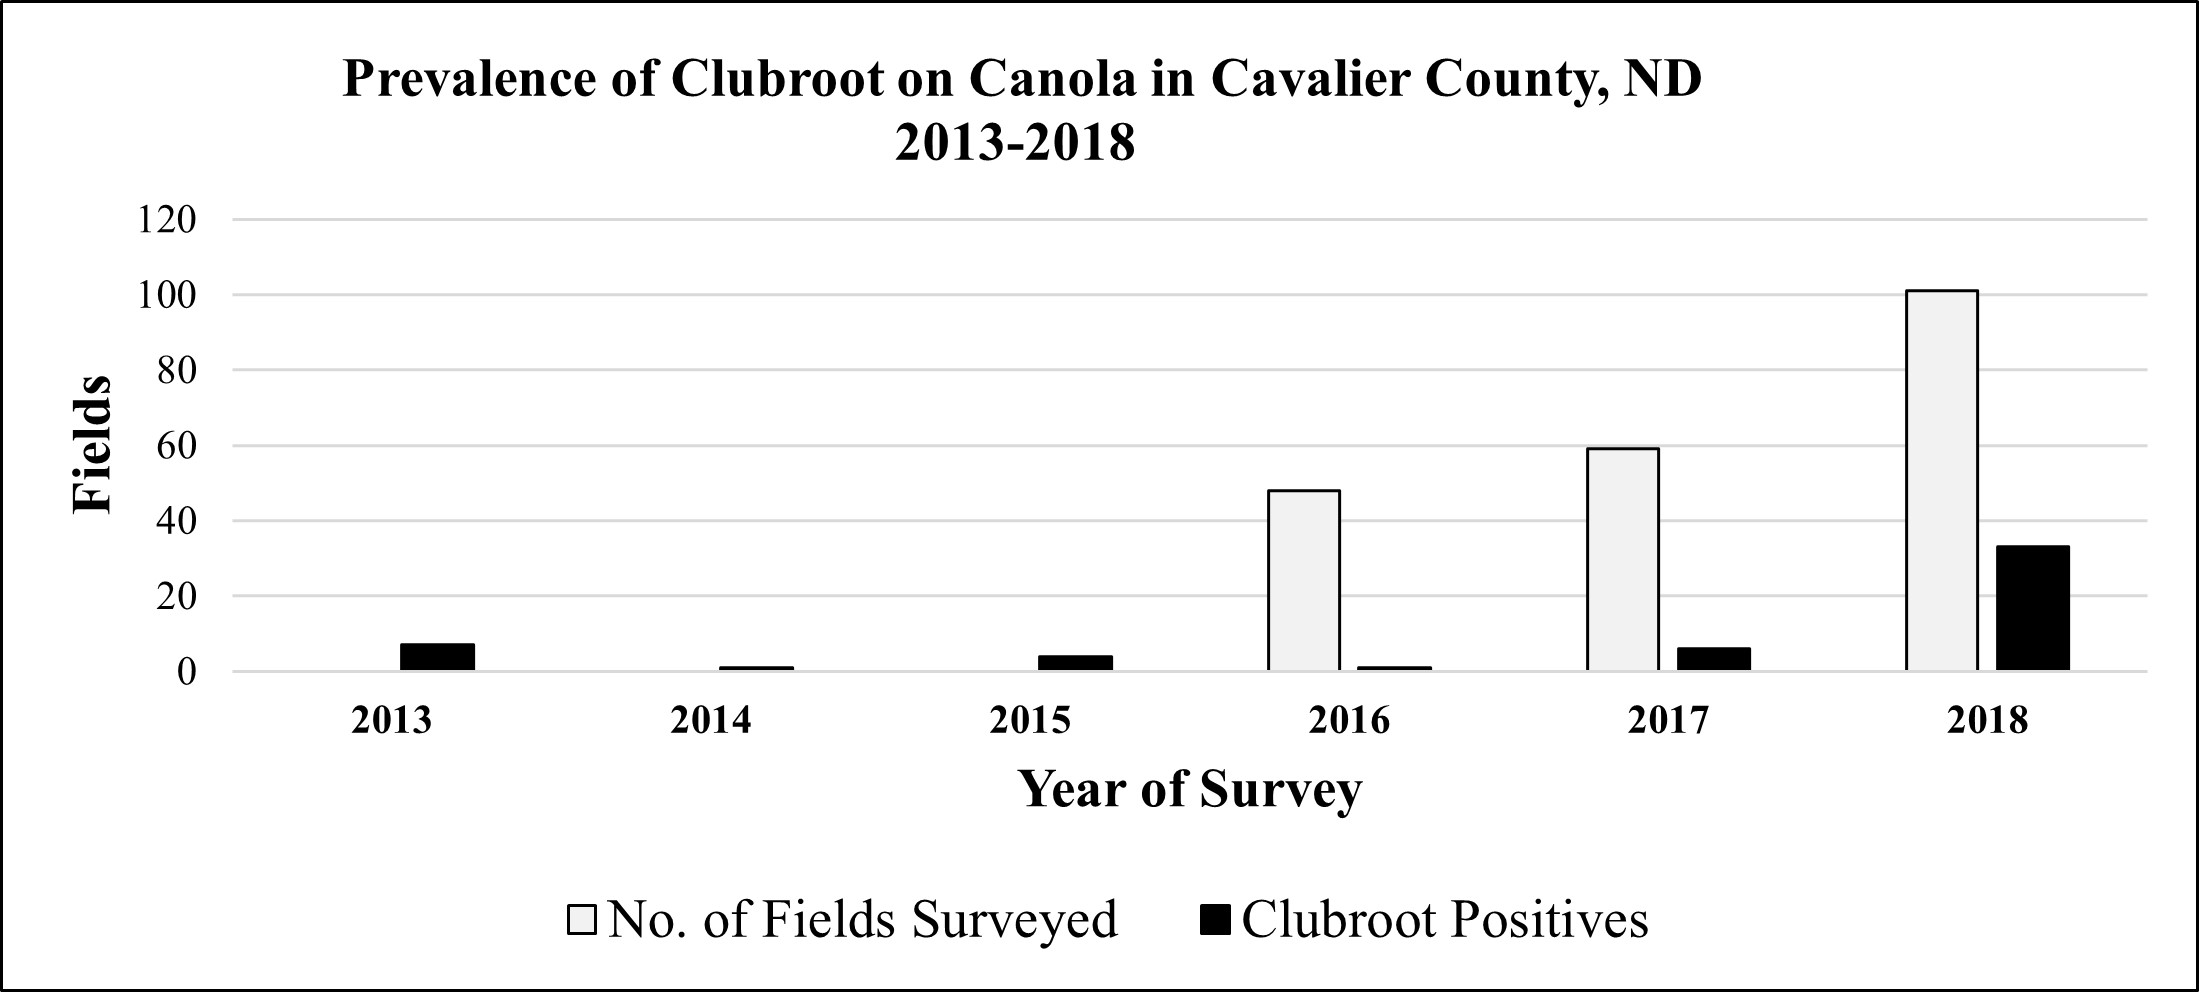 Rapid spread of clubroot since its first report in 2013 in Cavalier County.